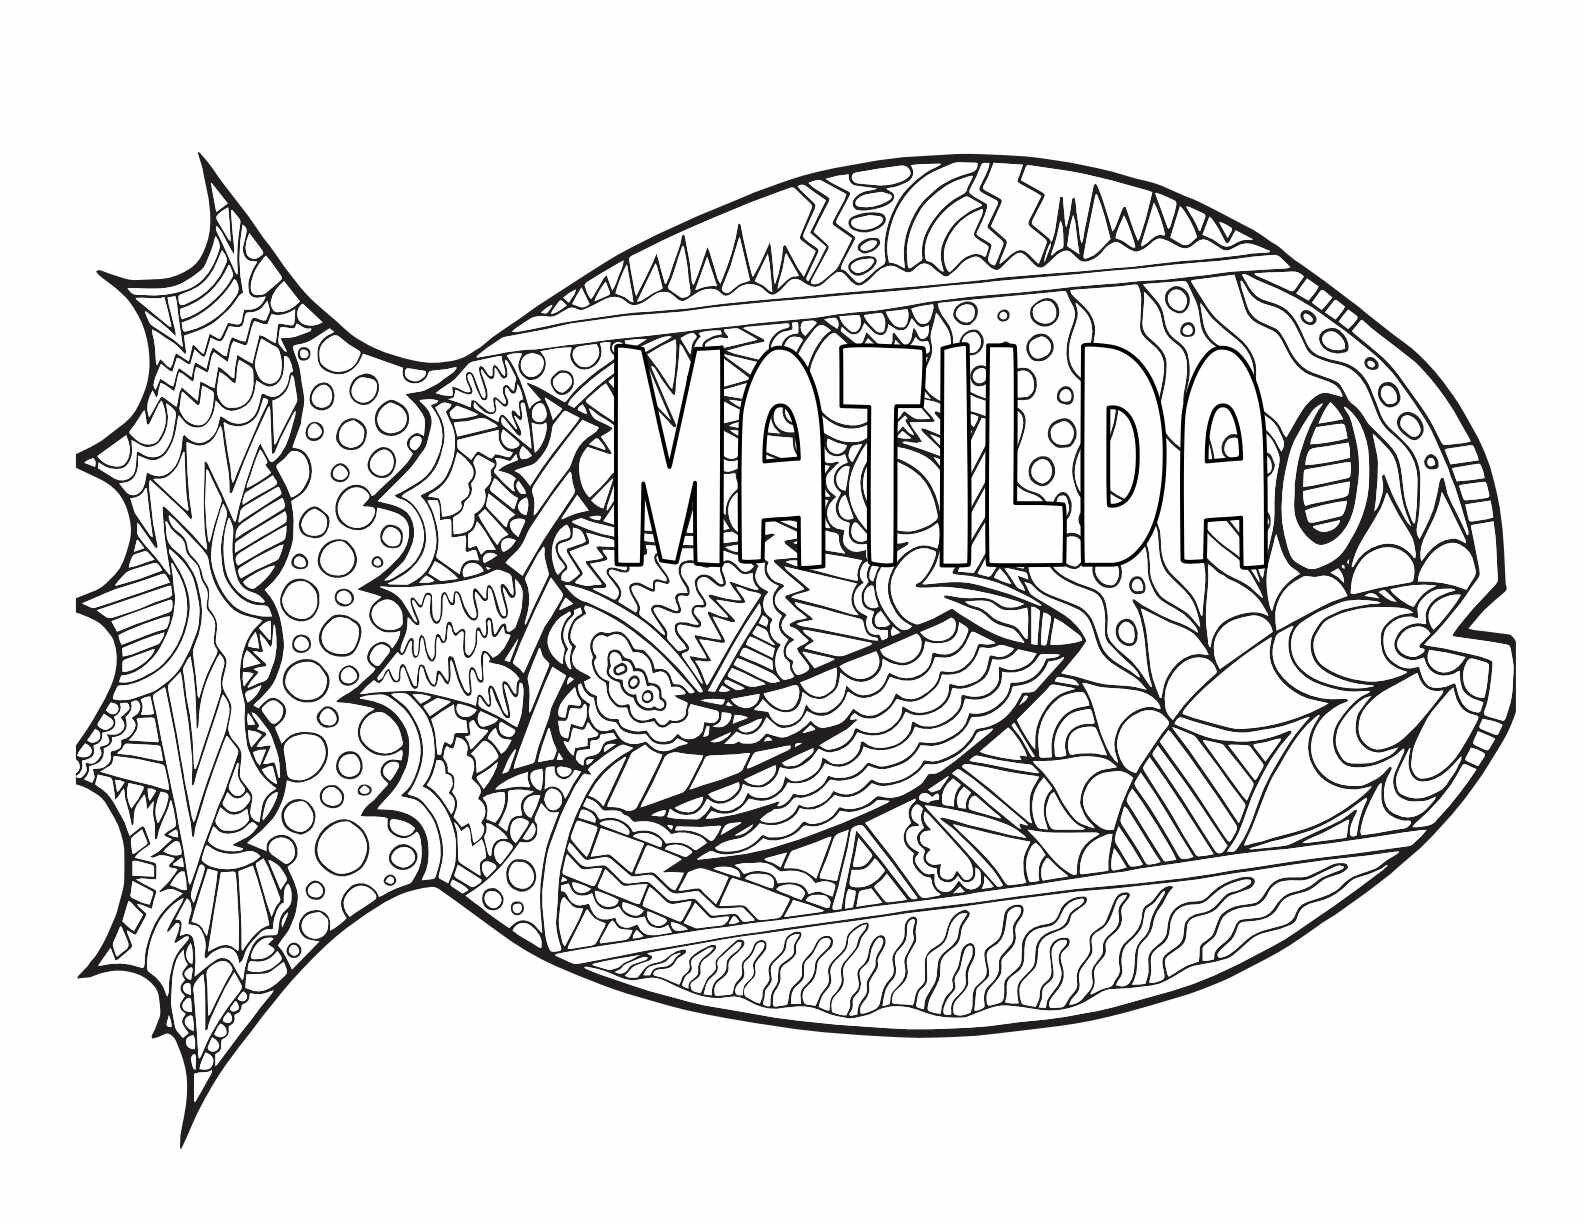 matilda-3-free-printable-coloring-pages-stevie-doodles